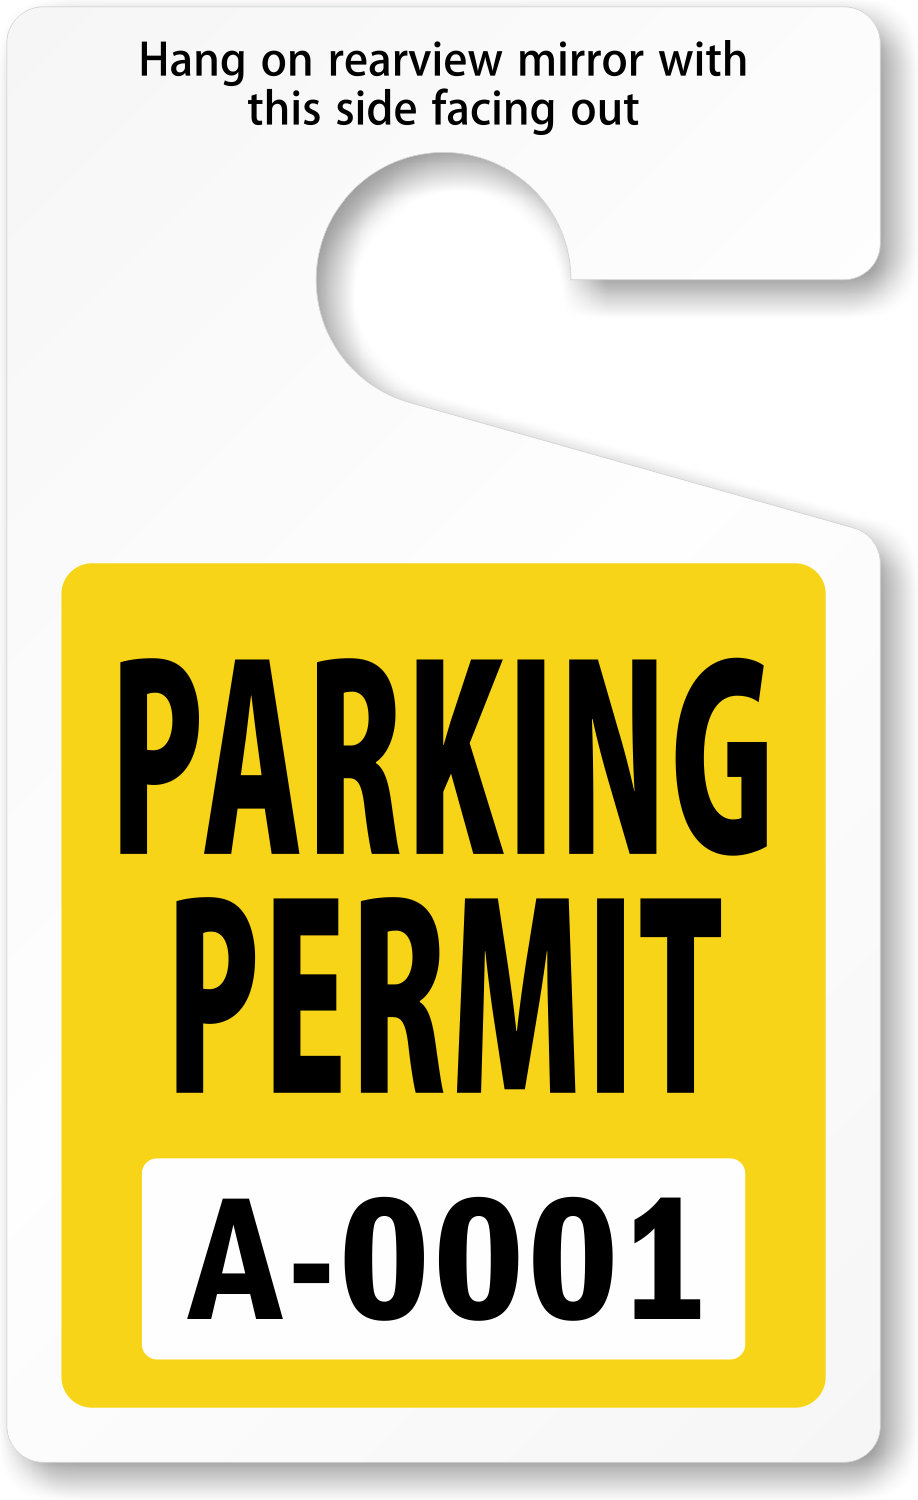 Two-sided parking permits are in-stock and ship fast. Heavy-duty tag  outlasts all others. Our durable ToughTag™ material protects your embedded  text